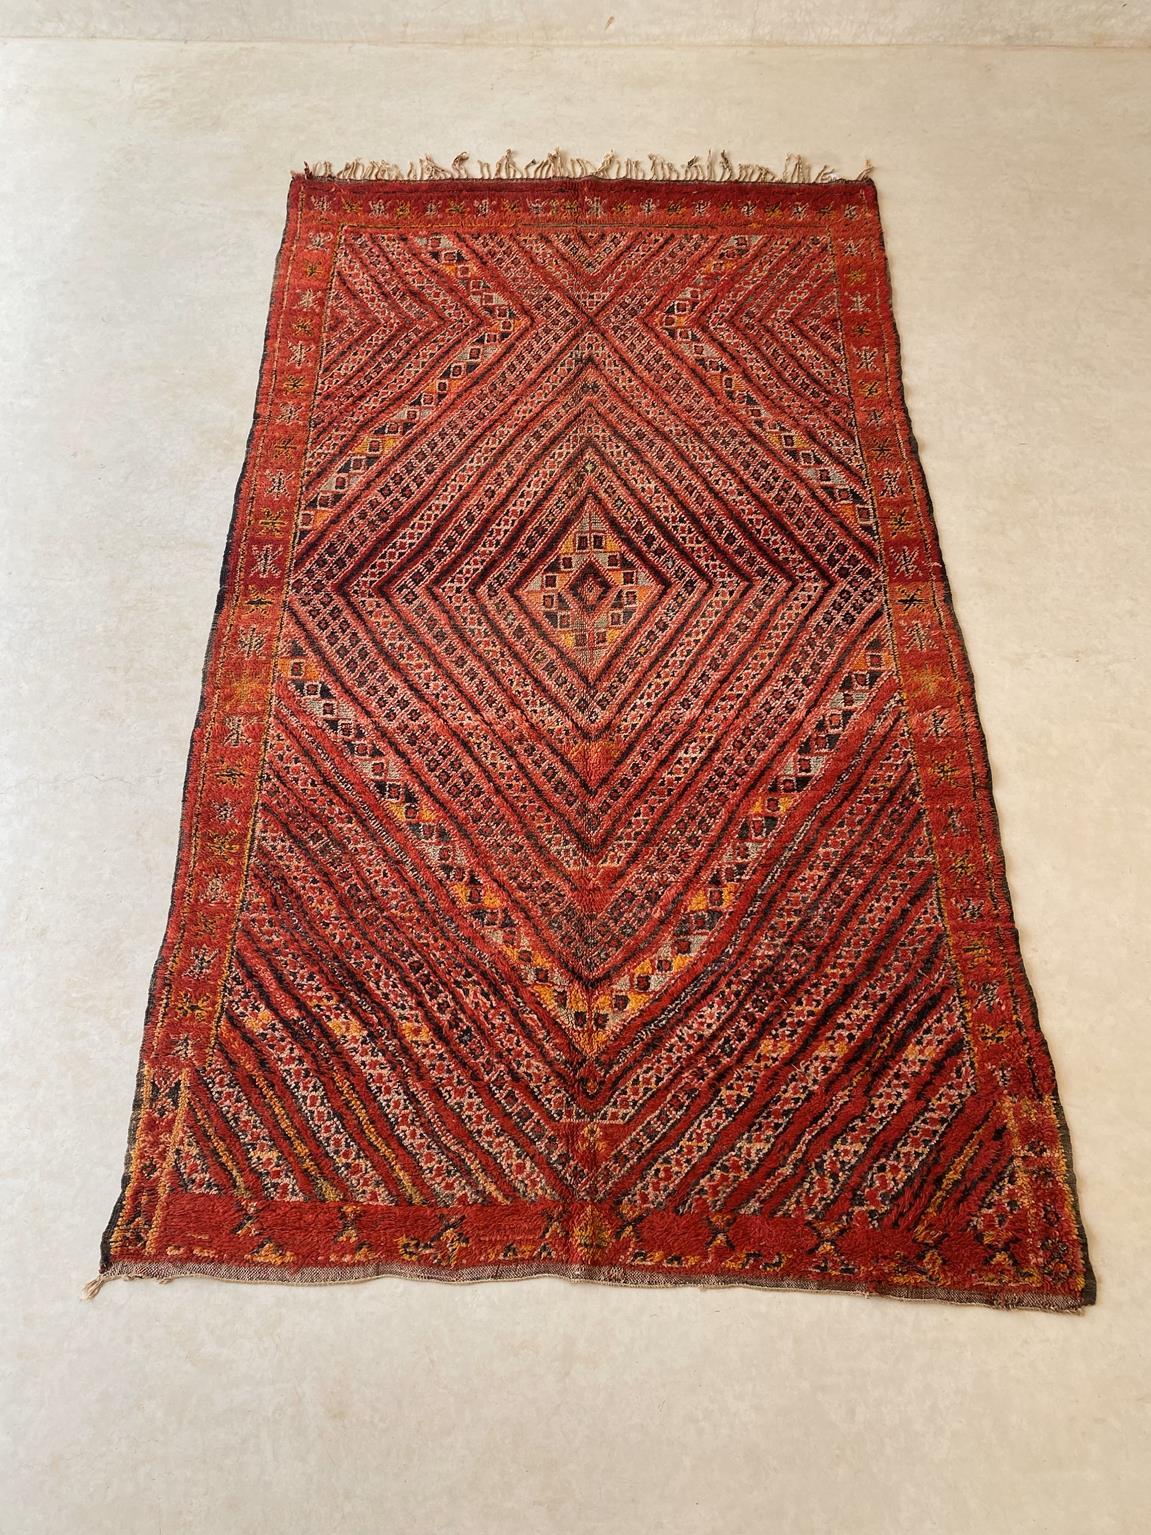 This beautiful vintage rug from the Zayane tribe is a great find! The main background color is a bright red with intricate designs in black, beige, yellow/orange and sage green. The pattern is a central, multiplied diamonds and the whole rug is